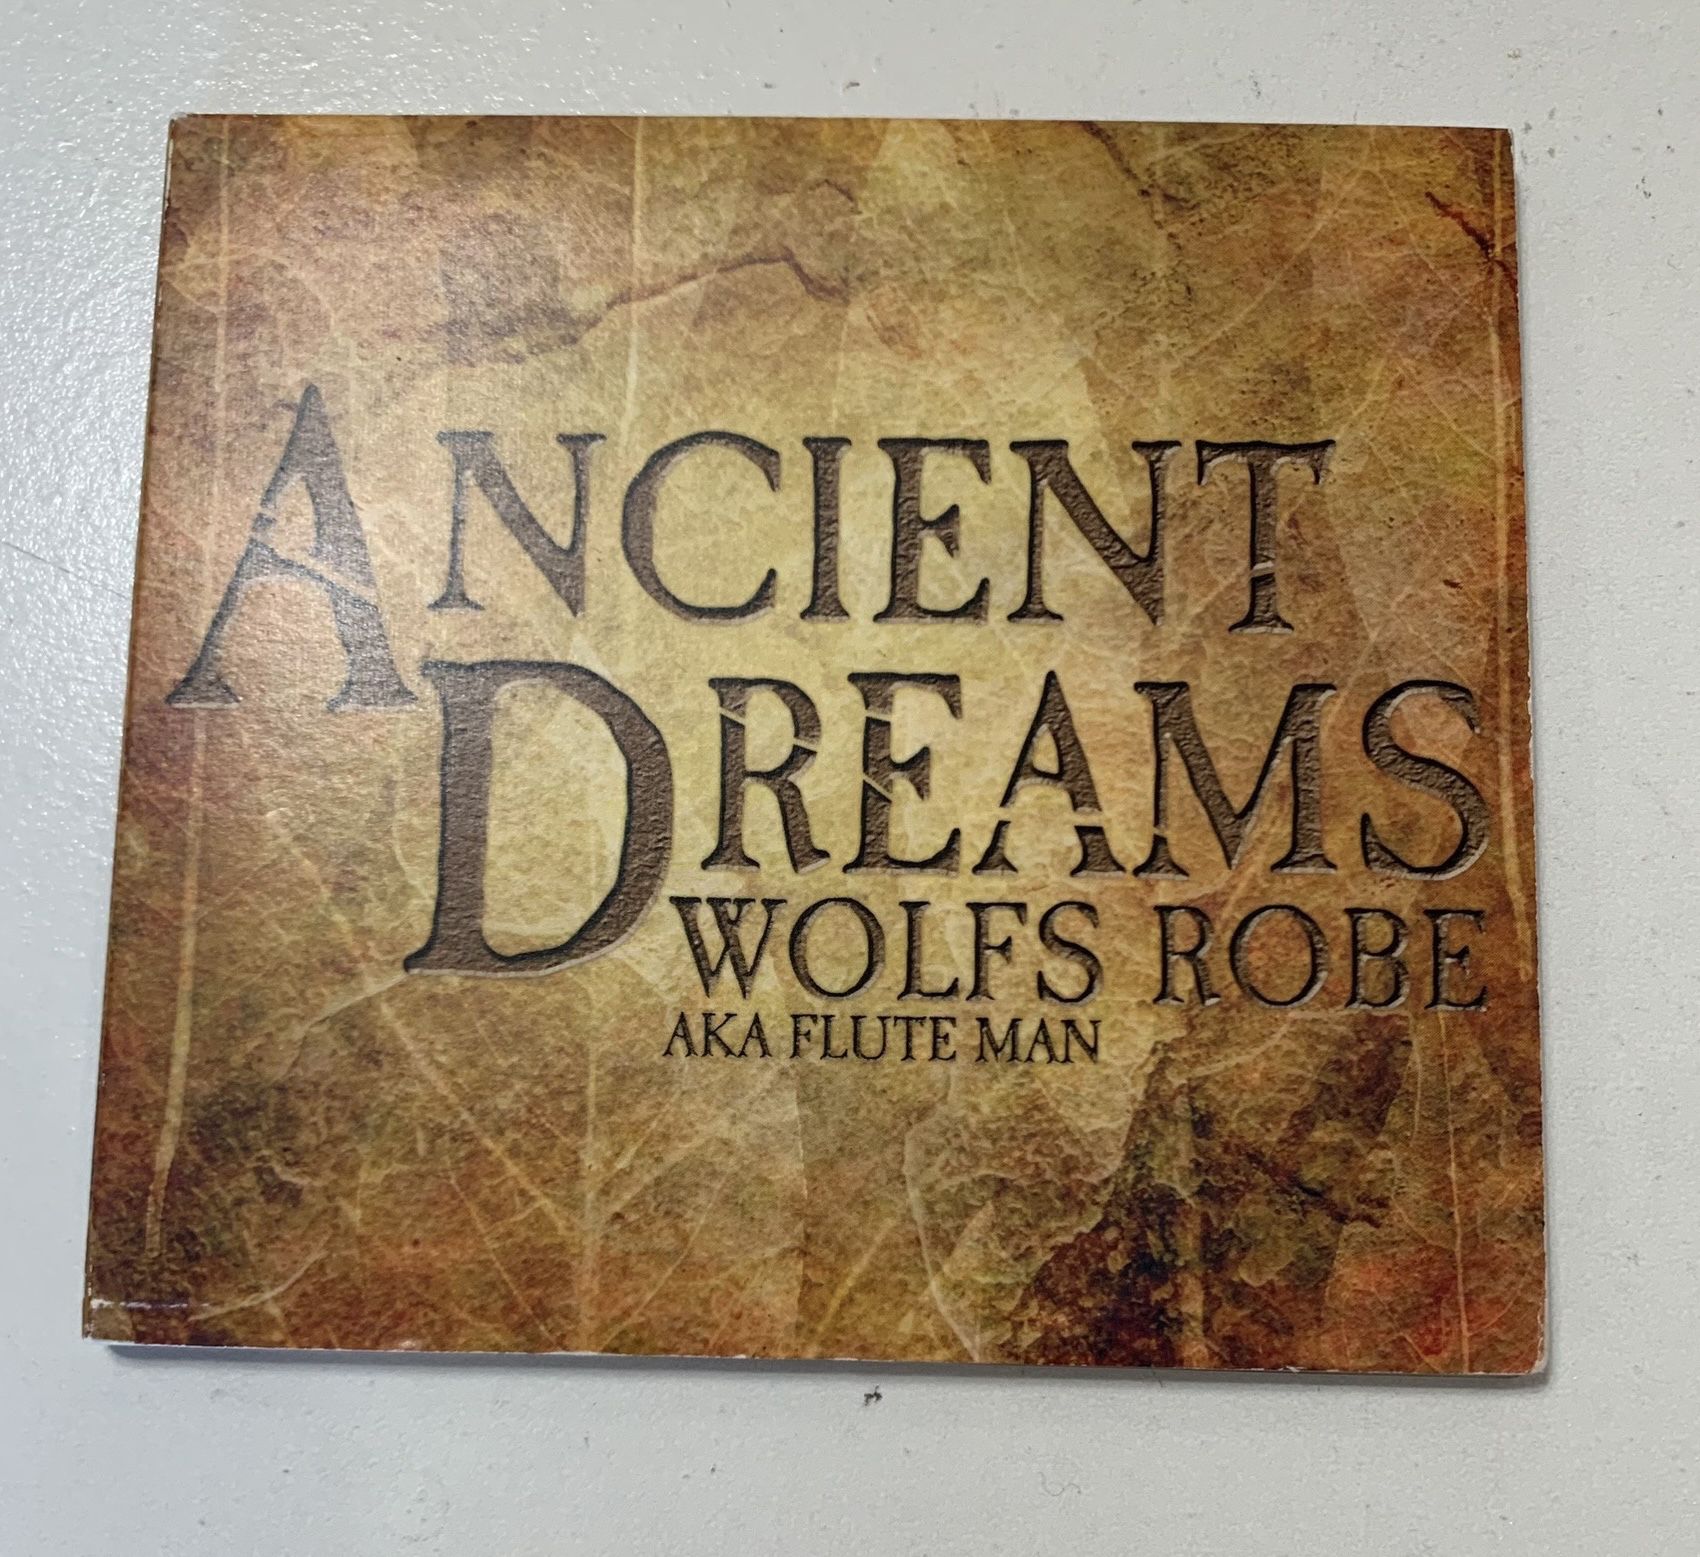 Wolfs Robe aka Flute Man Ancient Dreams Autographed 2008 CD